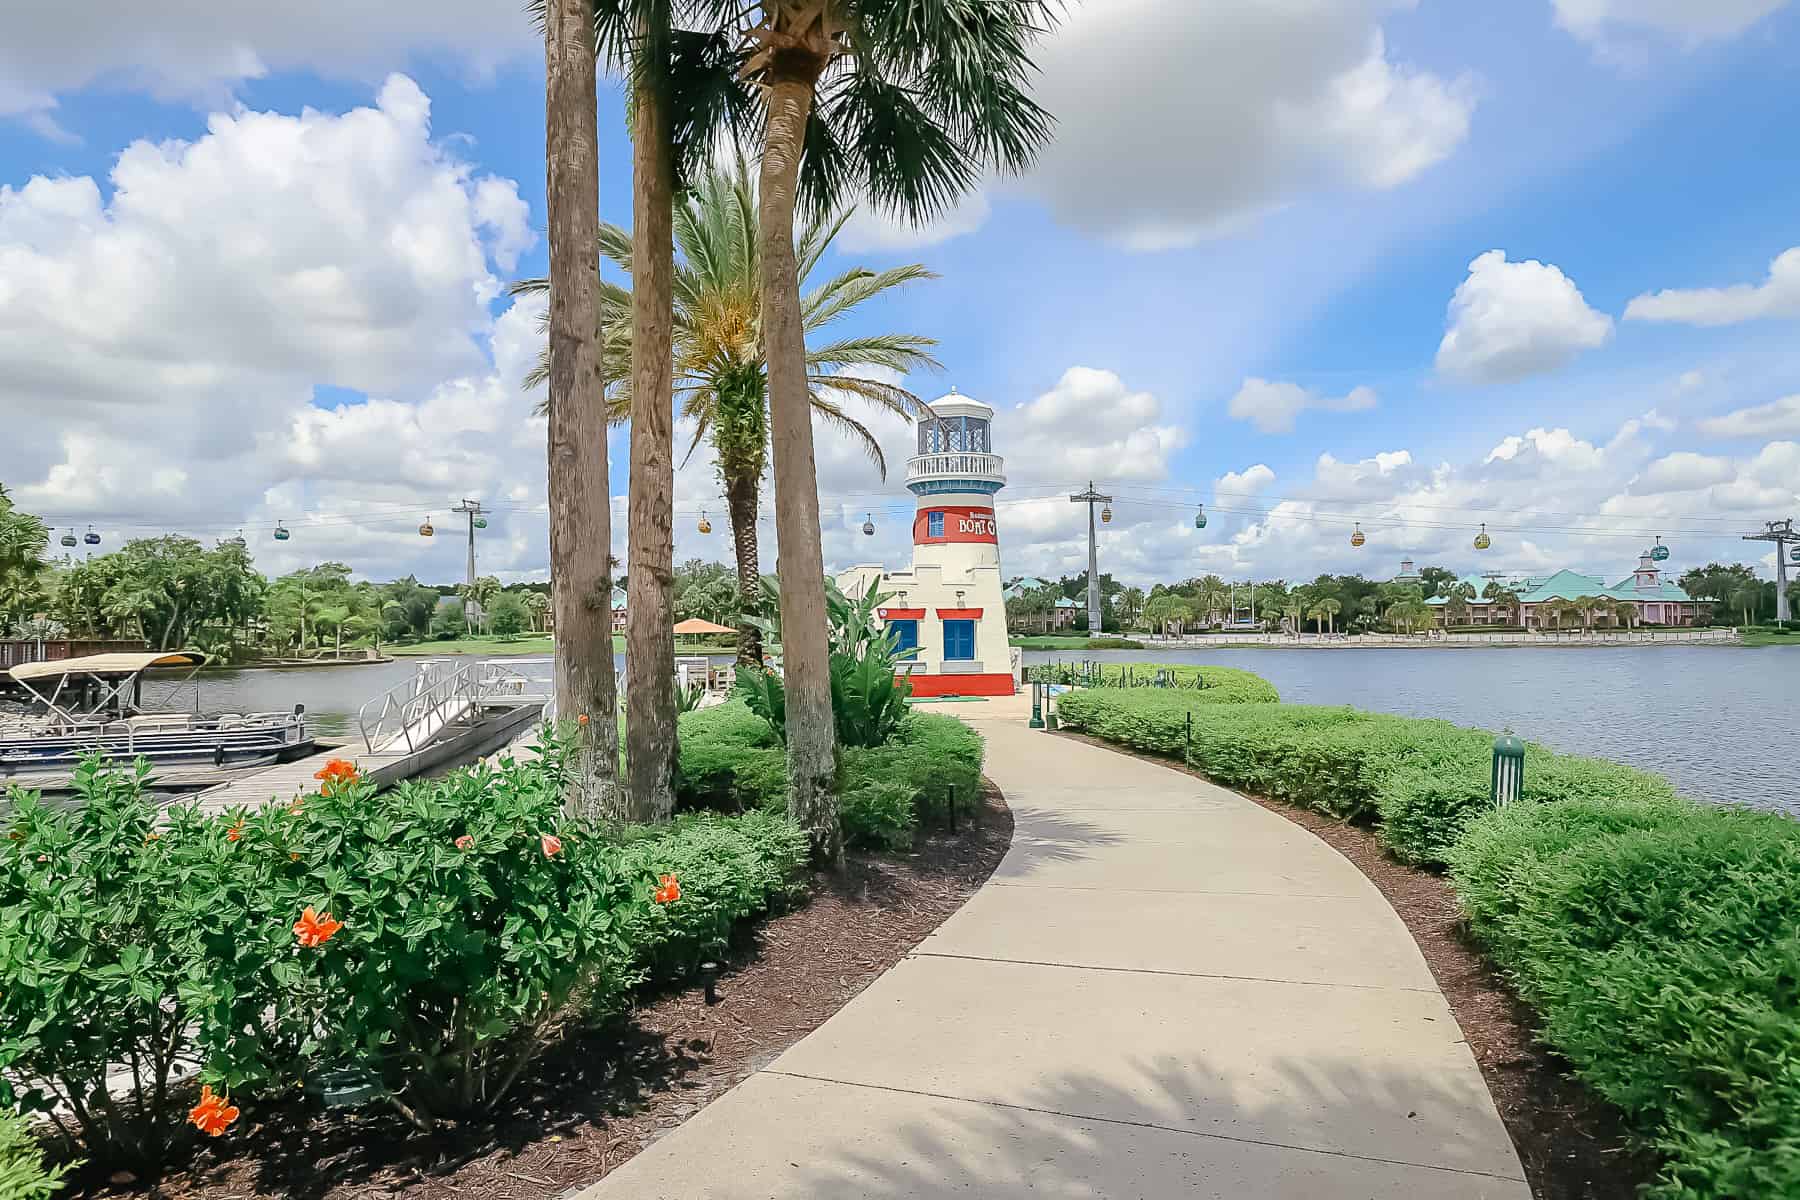 scenic photo of the lighthouse with the Skyliner in the distance